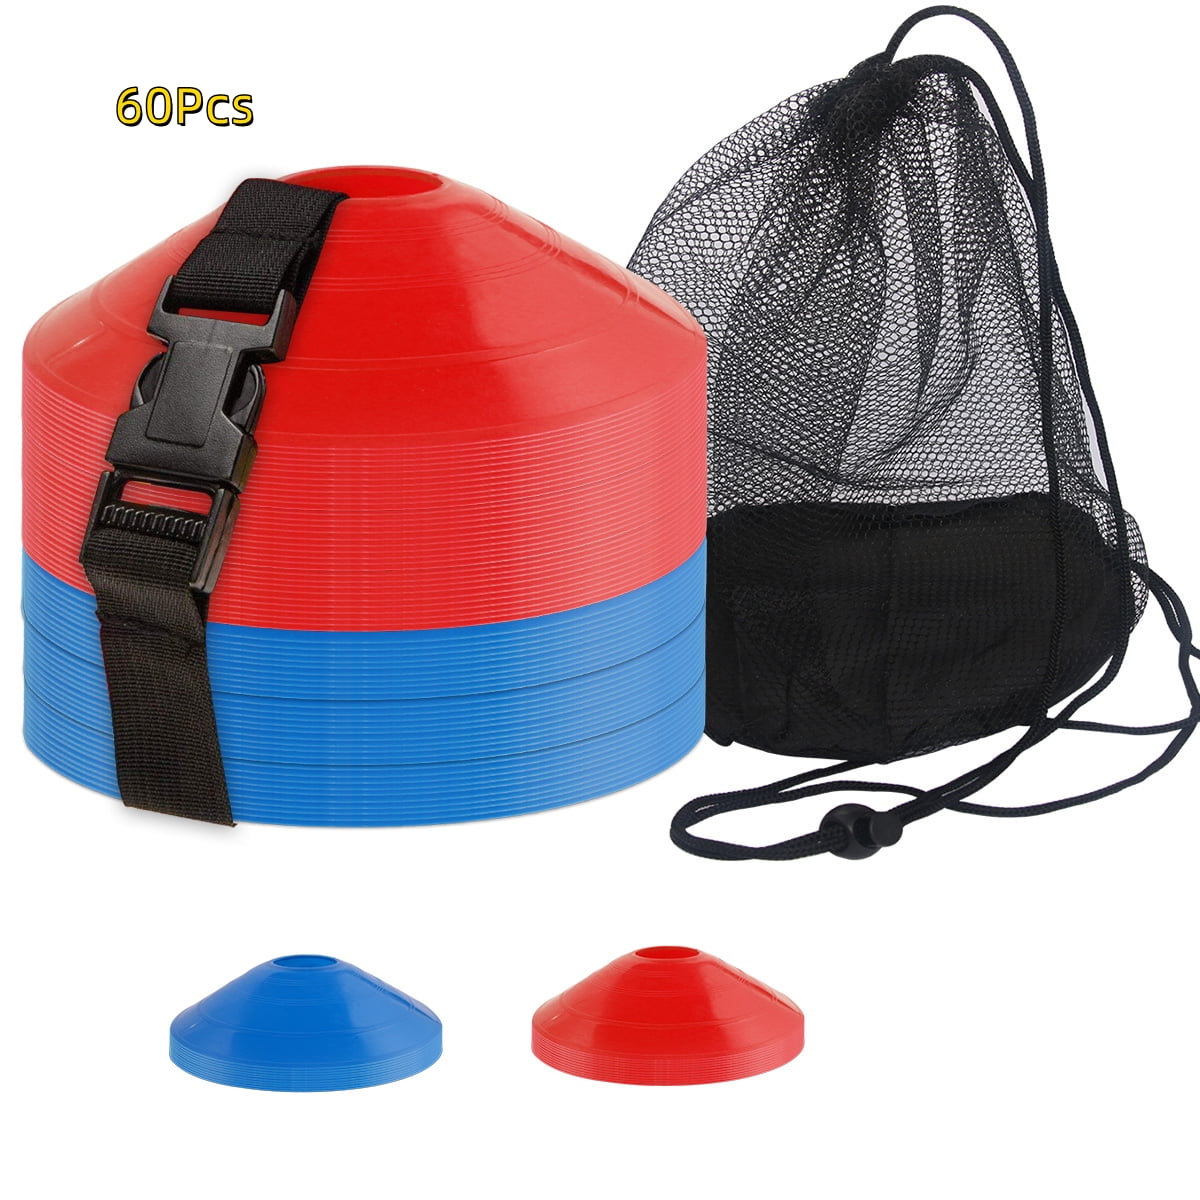 60PCS Soccer Cones with Strap Carry Bag Agility Disc Cones